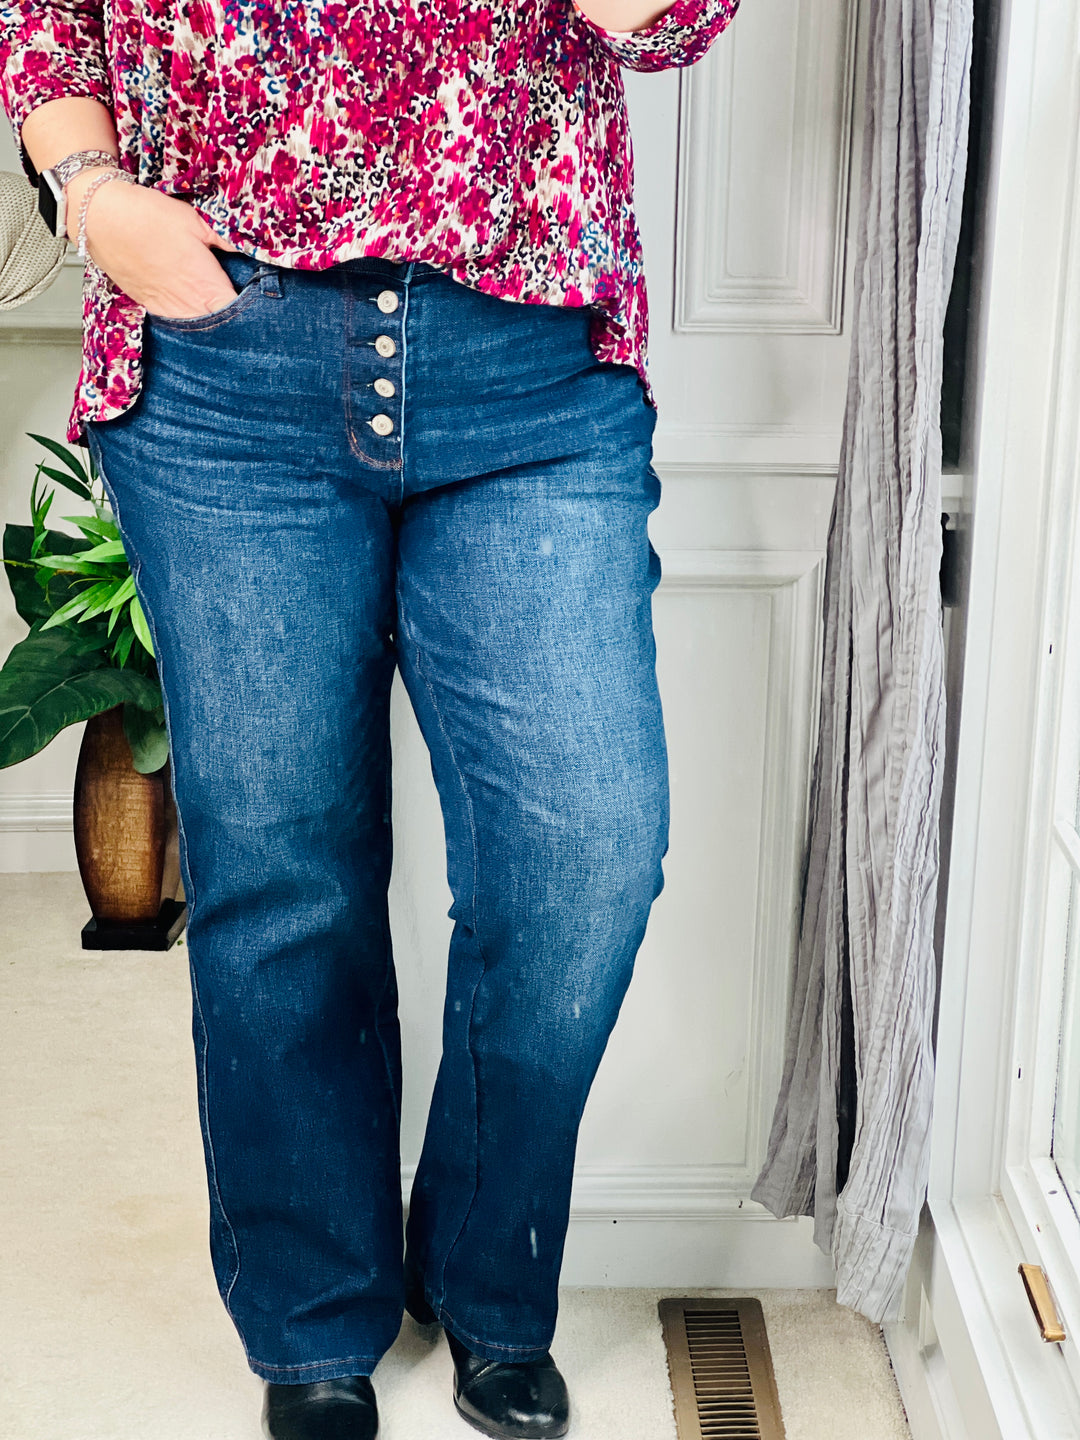 Judy Blue Women's Denim Jeans Styled by Steph Online Boutique Granger, IN